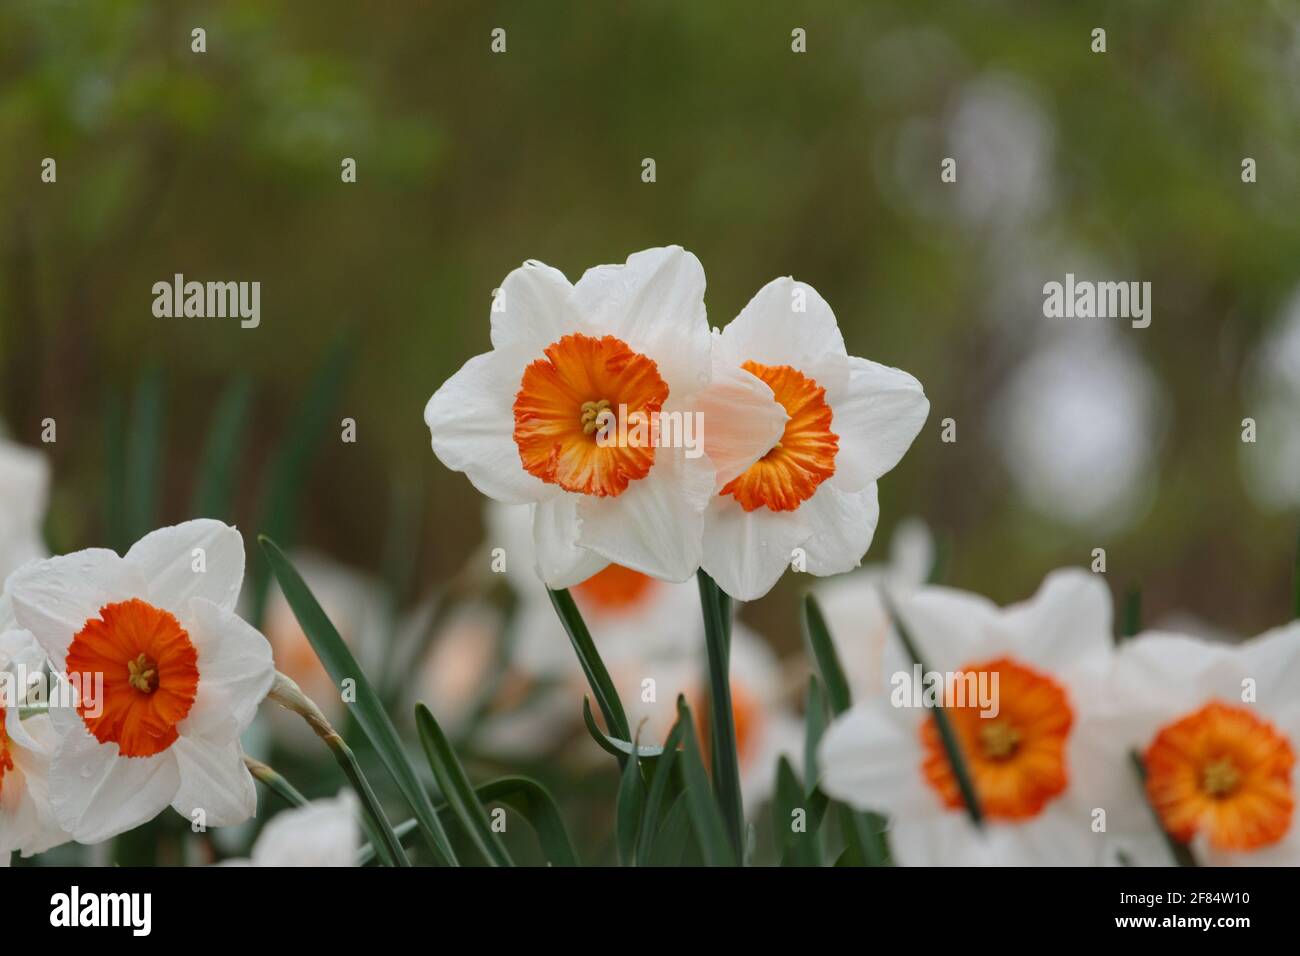 group of small cupped daffodils or narcissus flowers with pure white petals and deep orange corona in the center with green foliage in the background Stock Photo